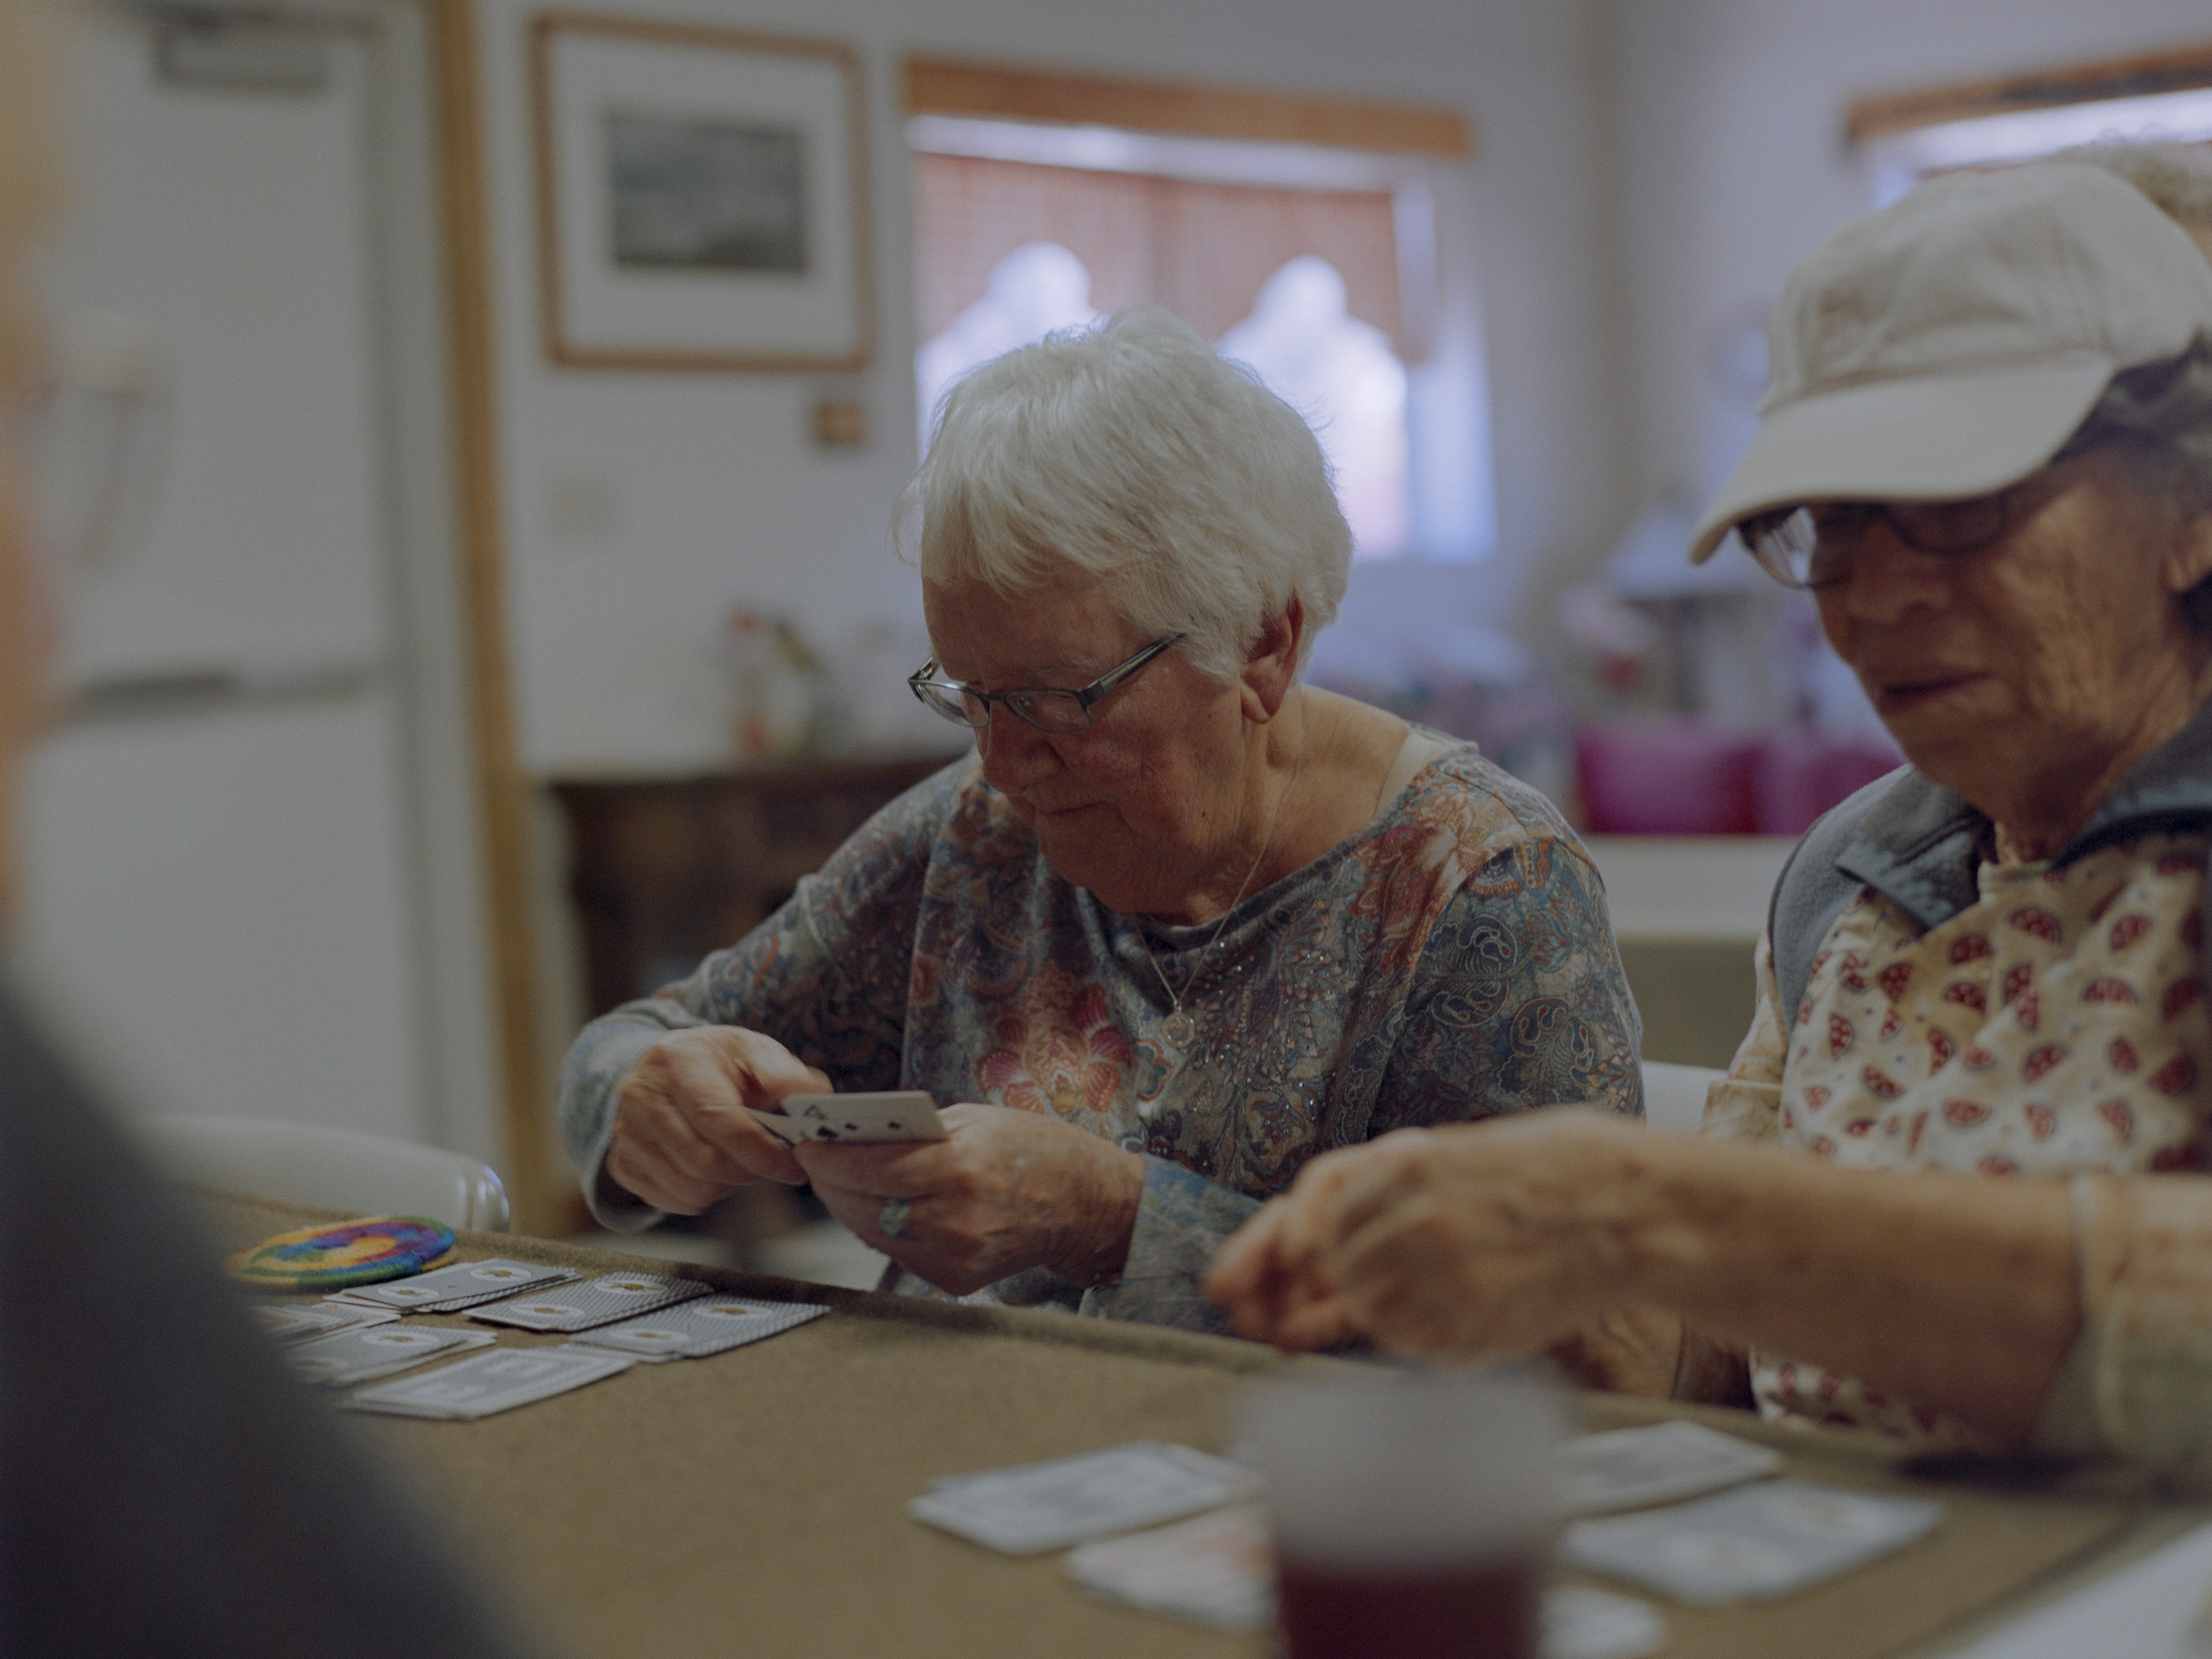 Kathleen, 84, left, and Rose, 79, play cards at the Glenwood Senior Center. Both have lost family members to suicide. The senior center is one of the few dedicated spaces for social connection for the area’s aging population. (Brandon Kapelow)